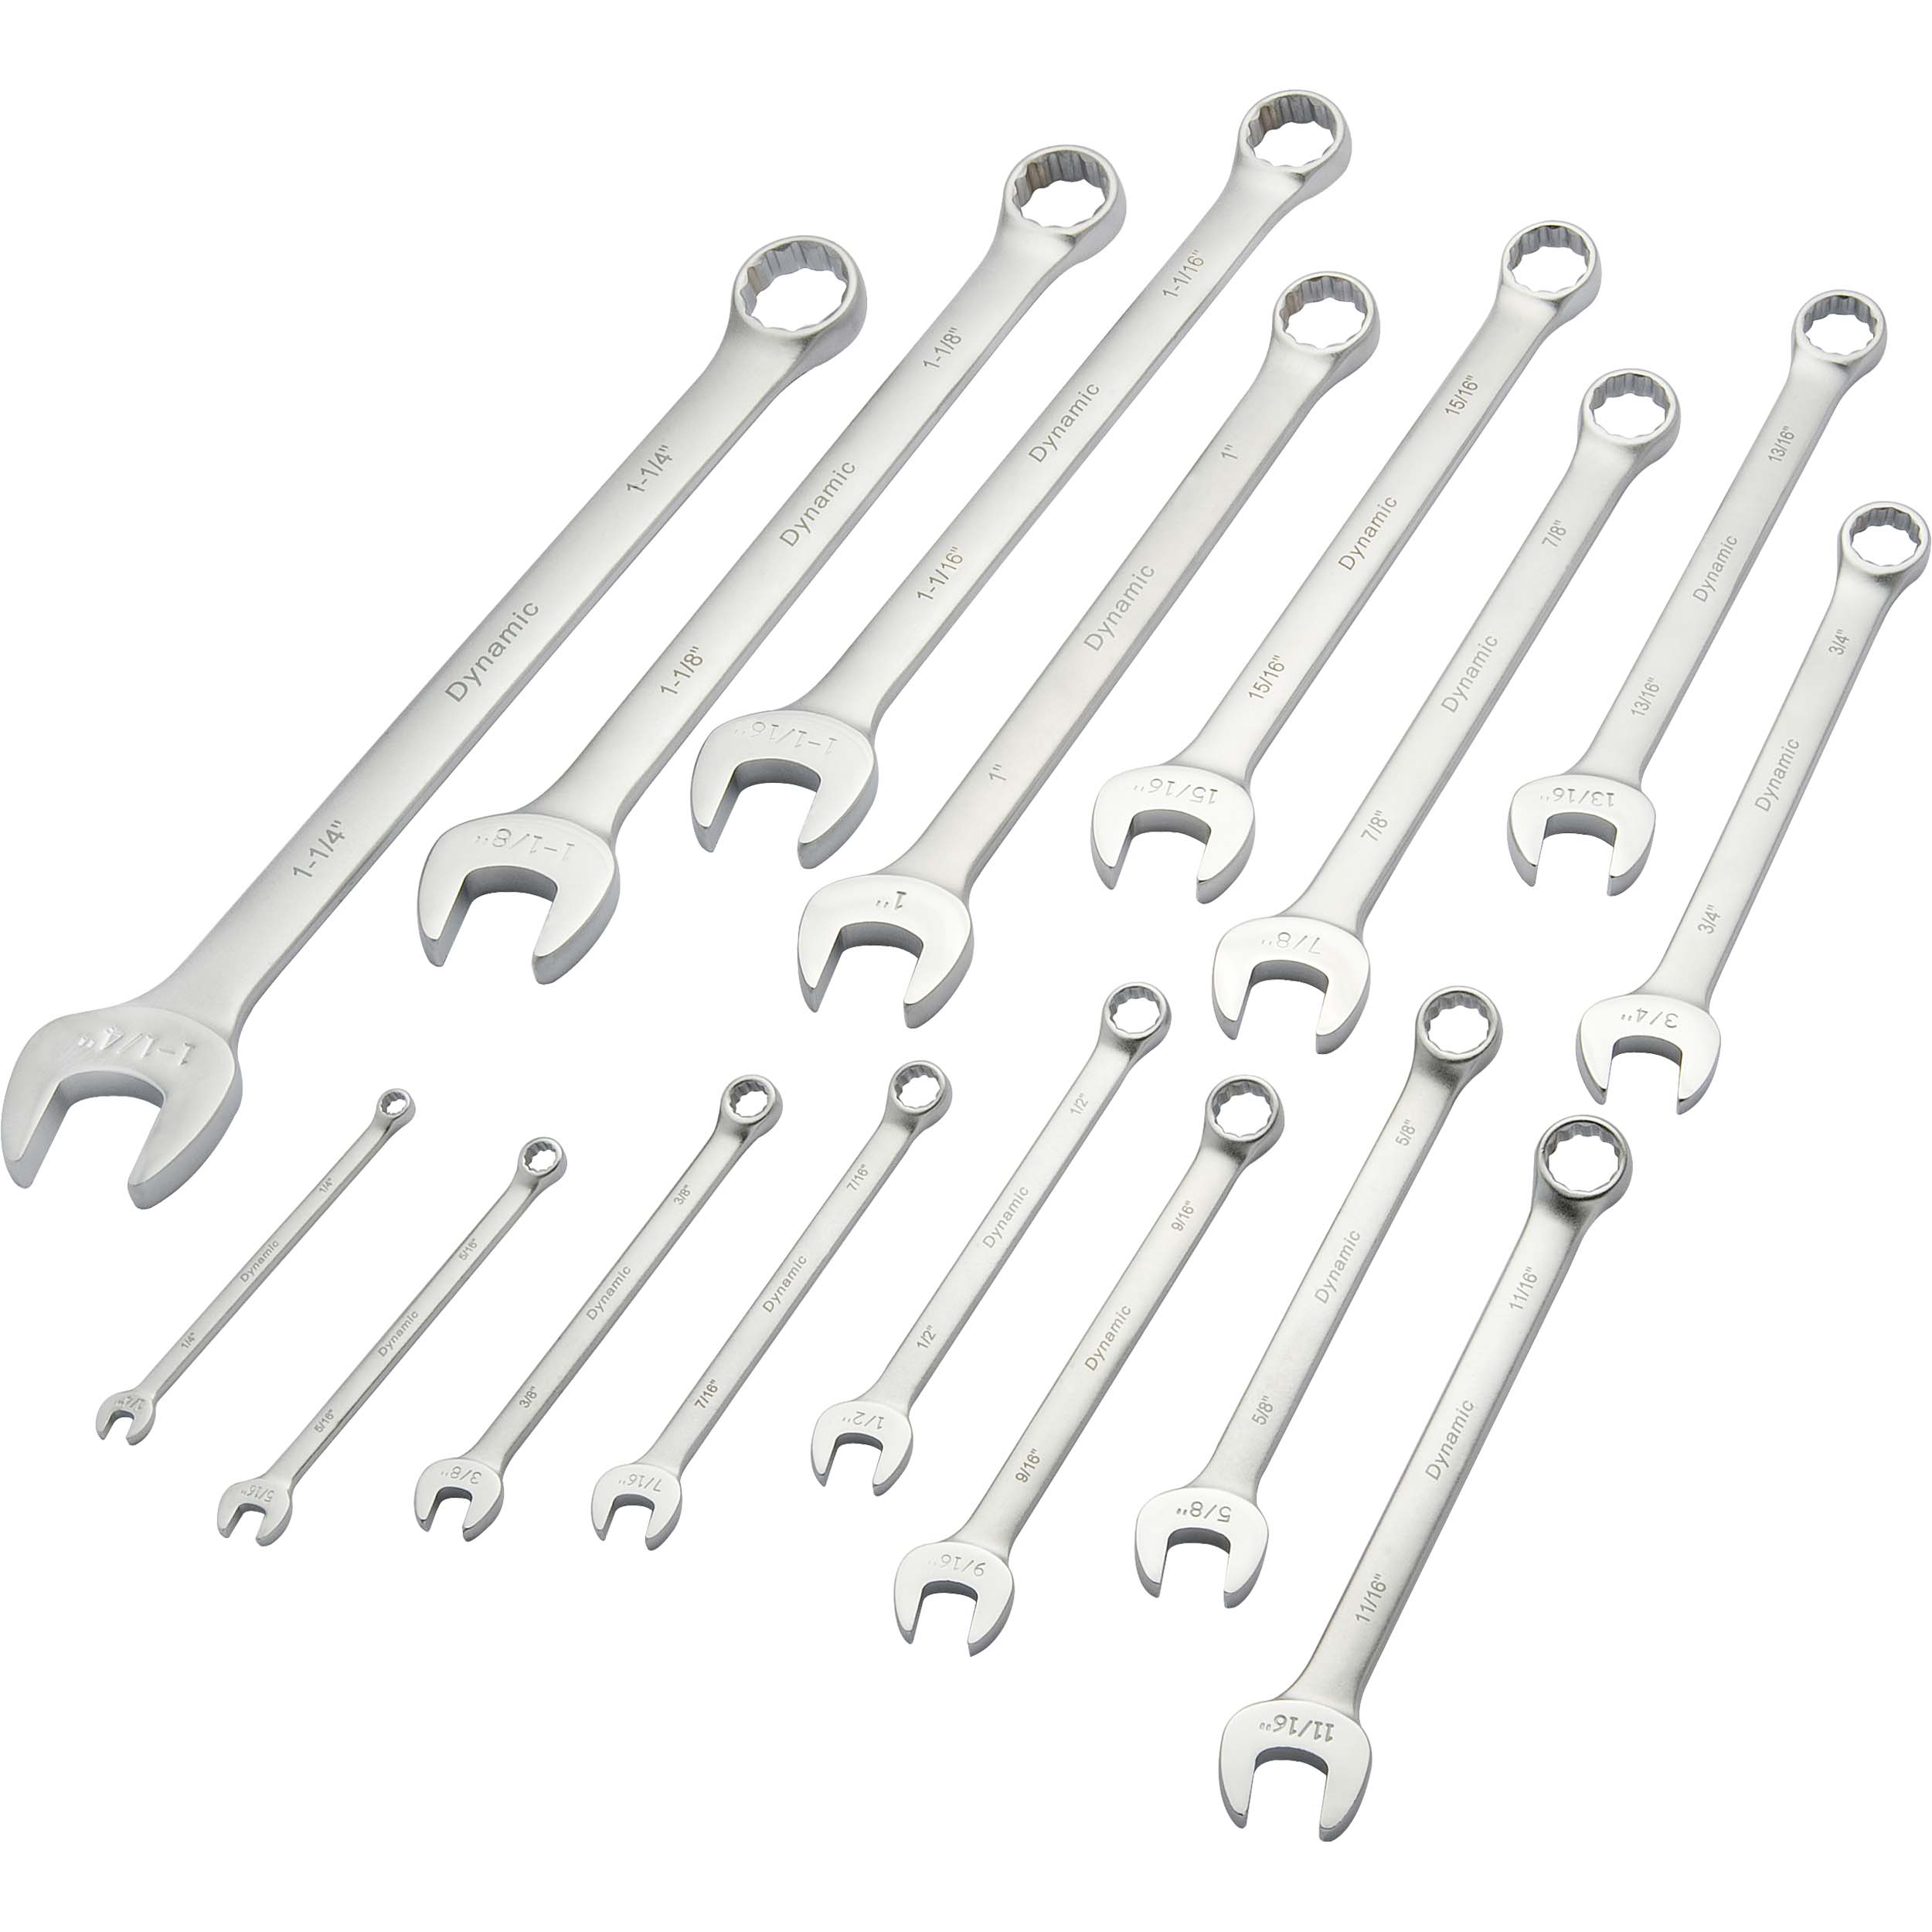 Tools 16pc Sae Combination Wrench Set, Contractor Series, With Satin Finish, 1/4" - 1-1/4"